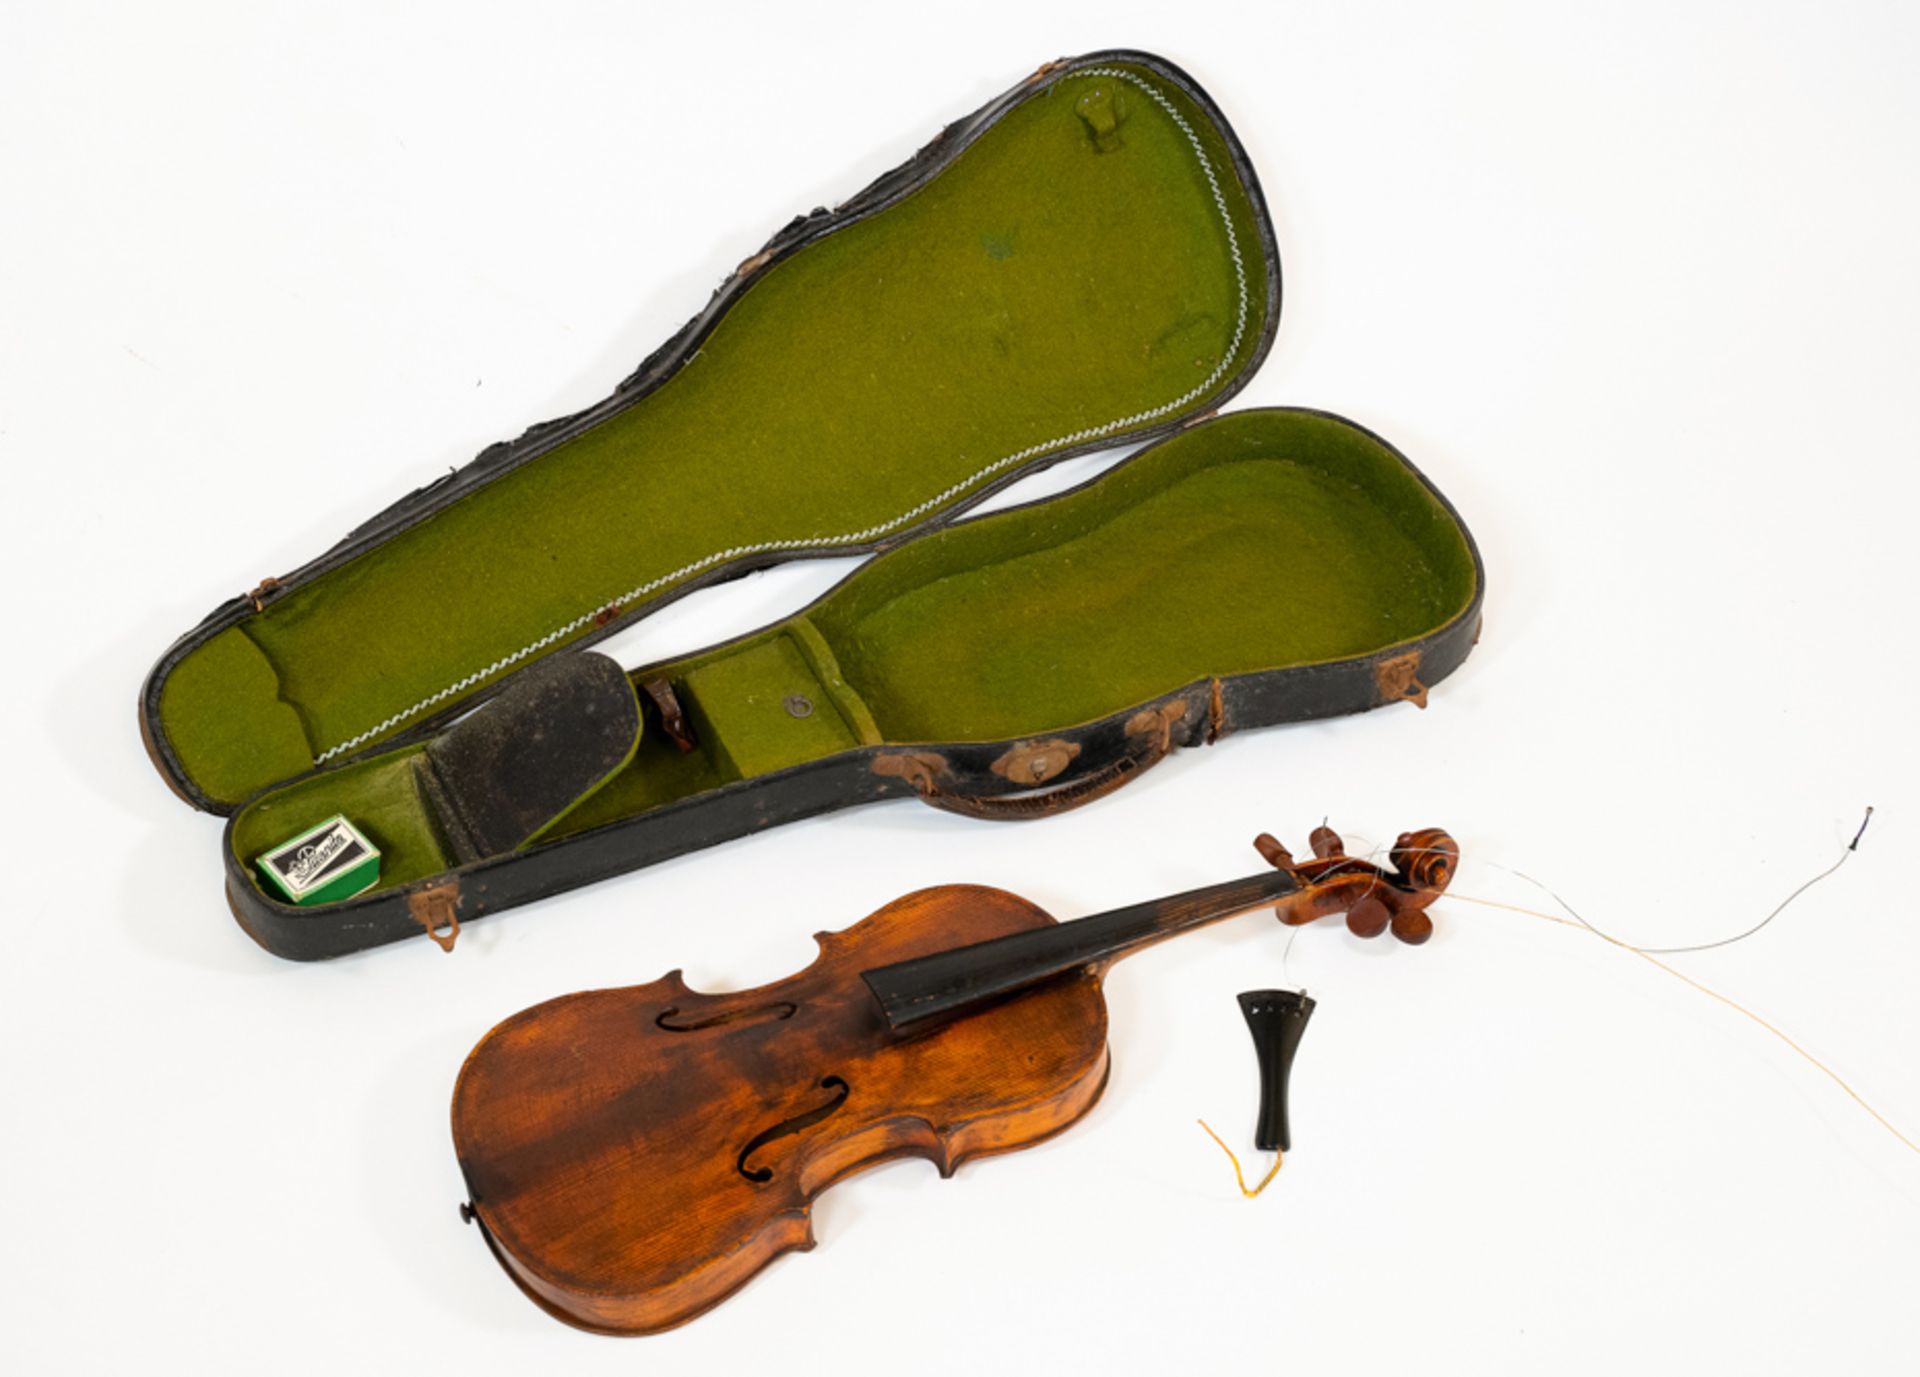 UNSIGNED HISTORICAL VIOLIN WITH CASE - Image 7 of 7